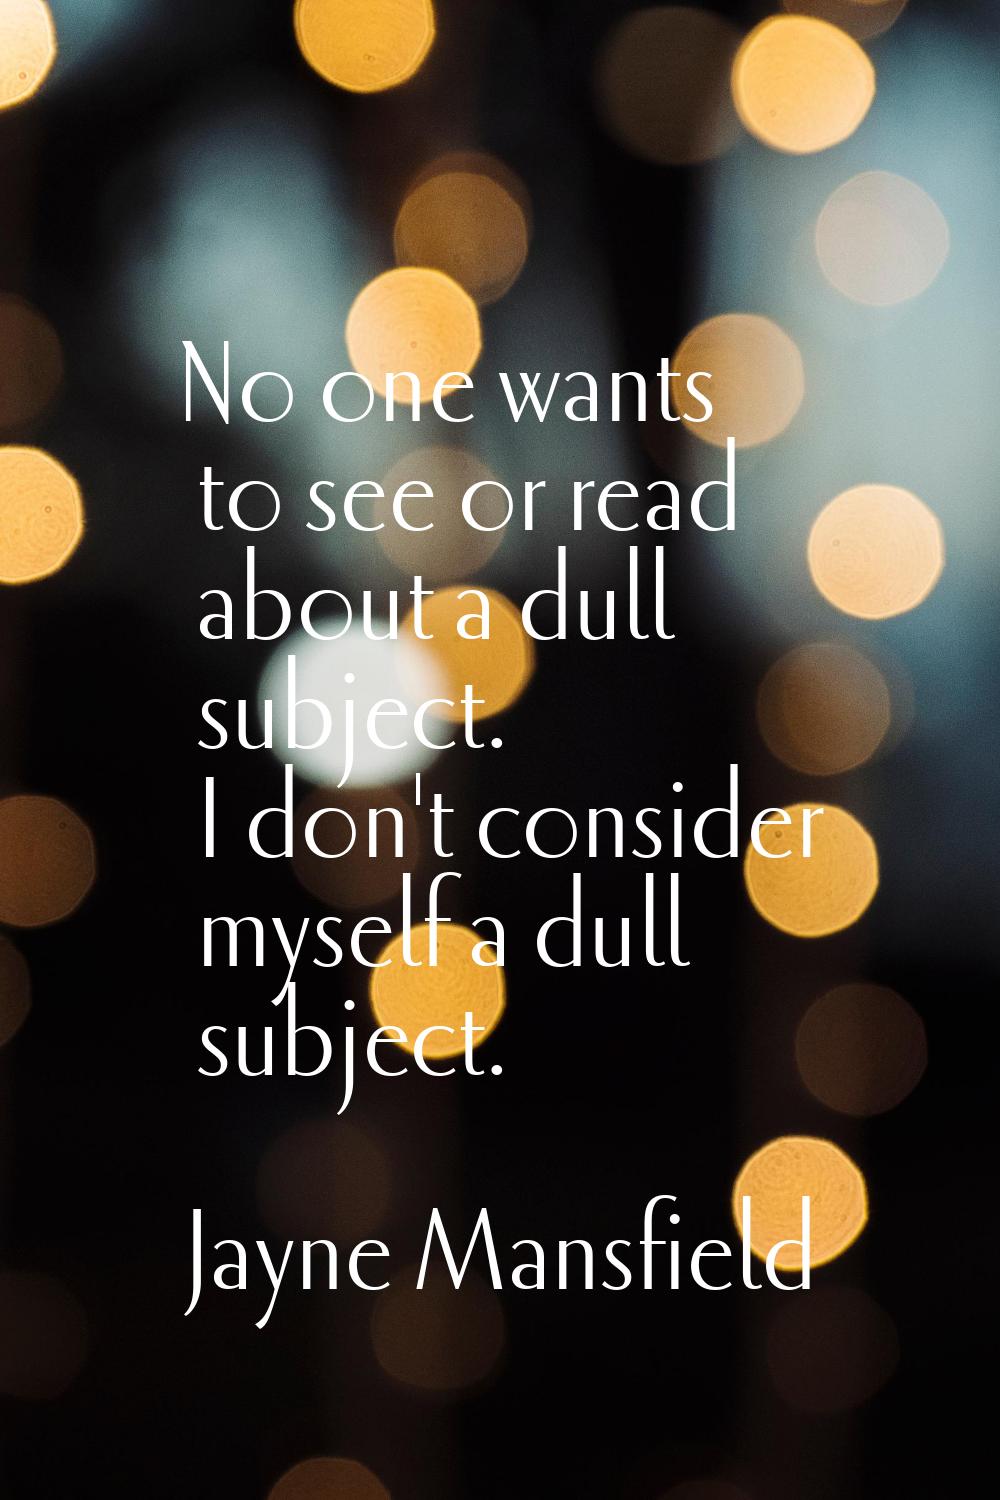 No one wants to see or read about a dull subject. I don't consider myself a dull subject.